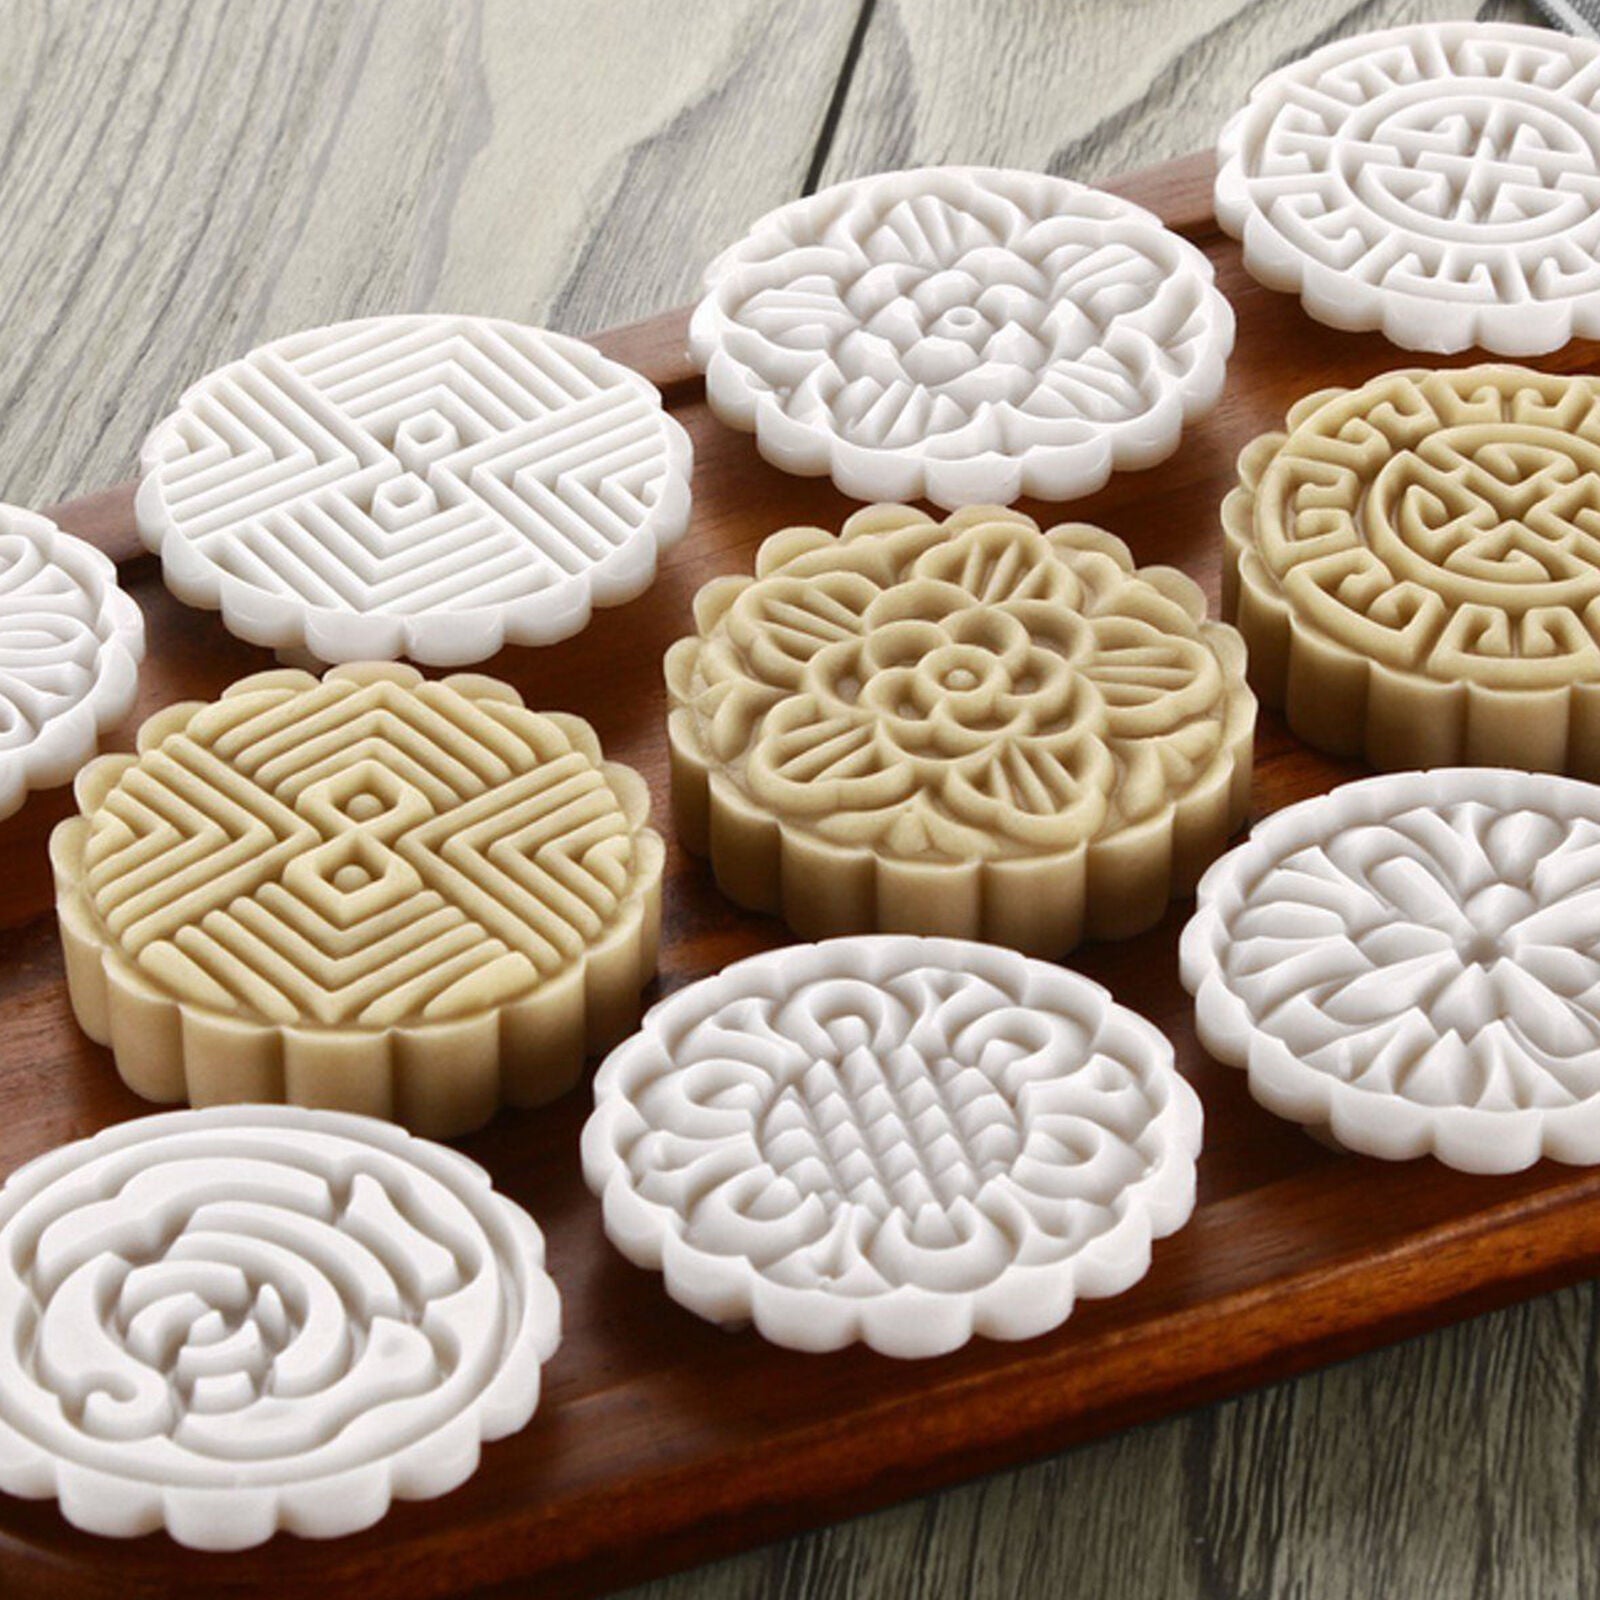 75g Mooncake Mold + 8 Flower Stamps DIY Baking Pastry Round Moon Cake Mould Tool